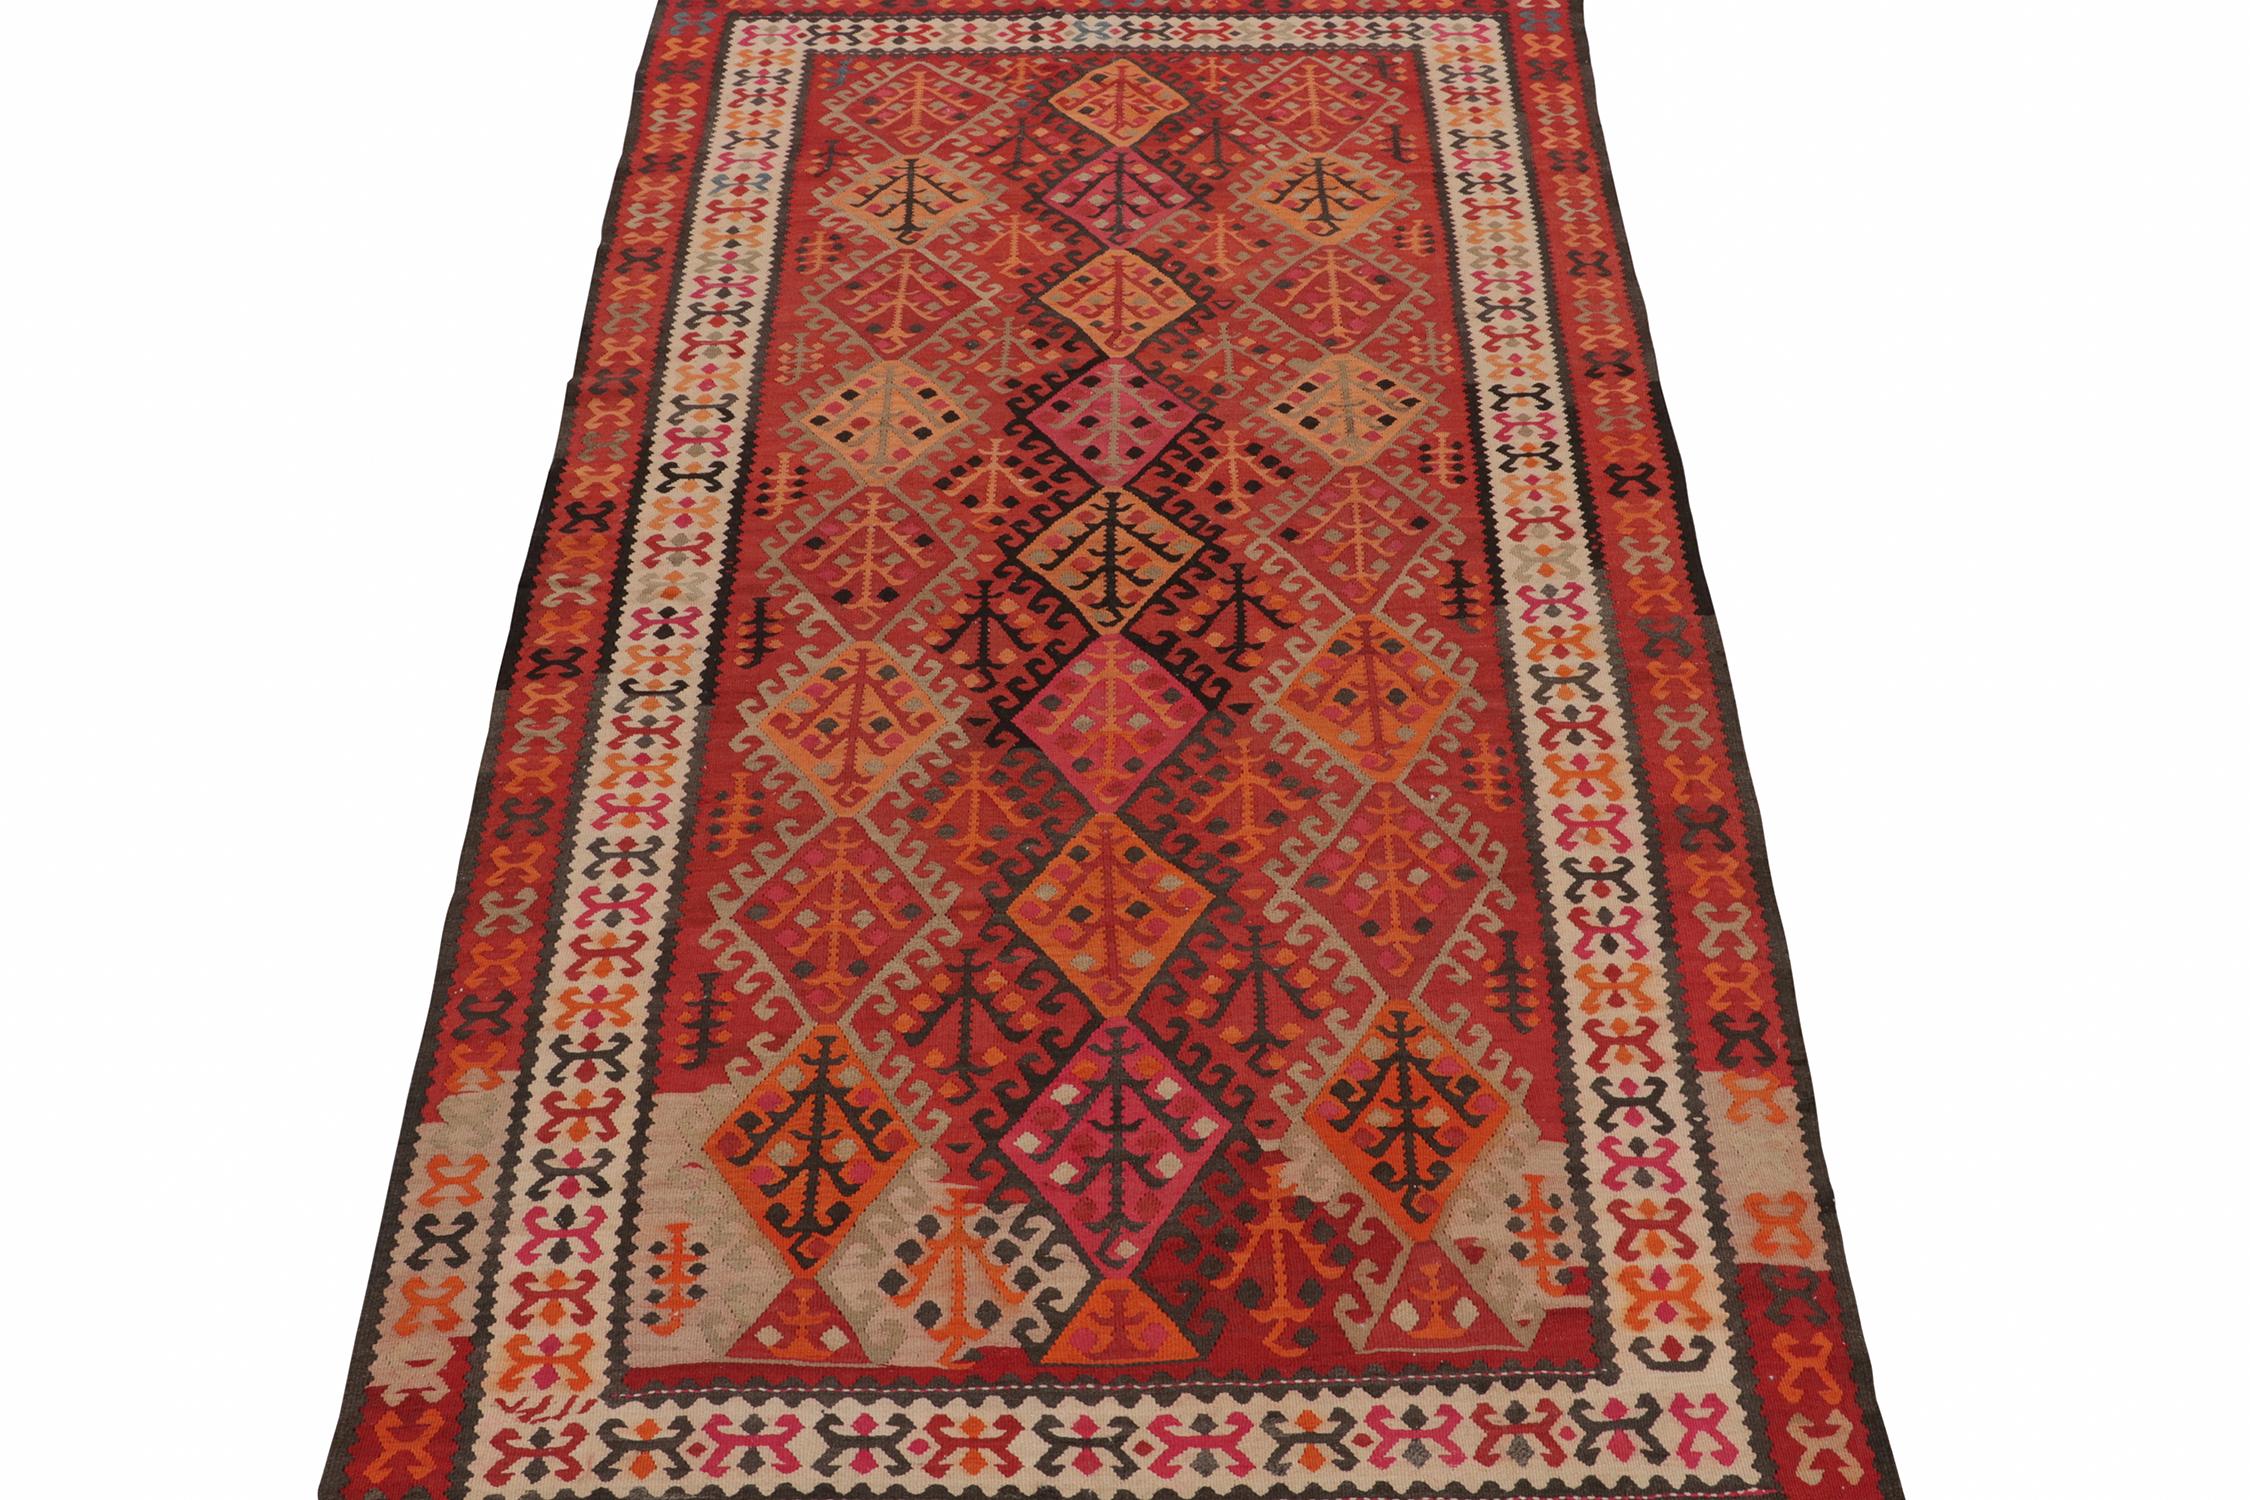 Turkish Vintage Tribal Kilim Rug in Red with Colorful Geometric Patterns by Rug & Kilim For Sale